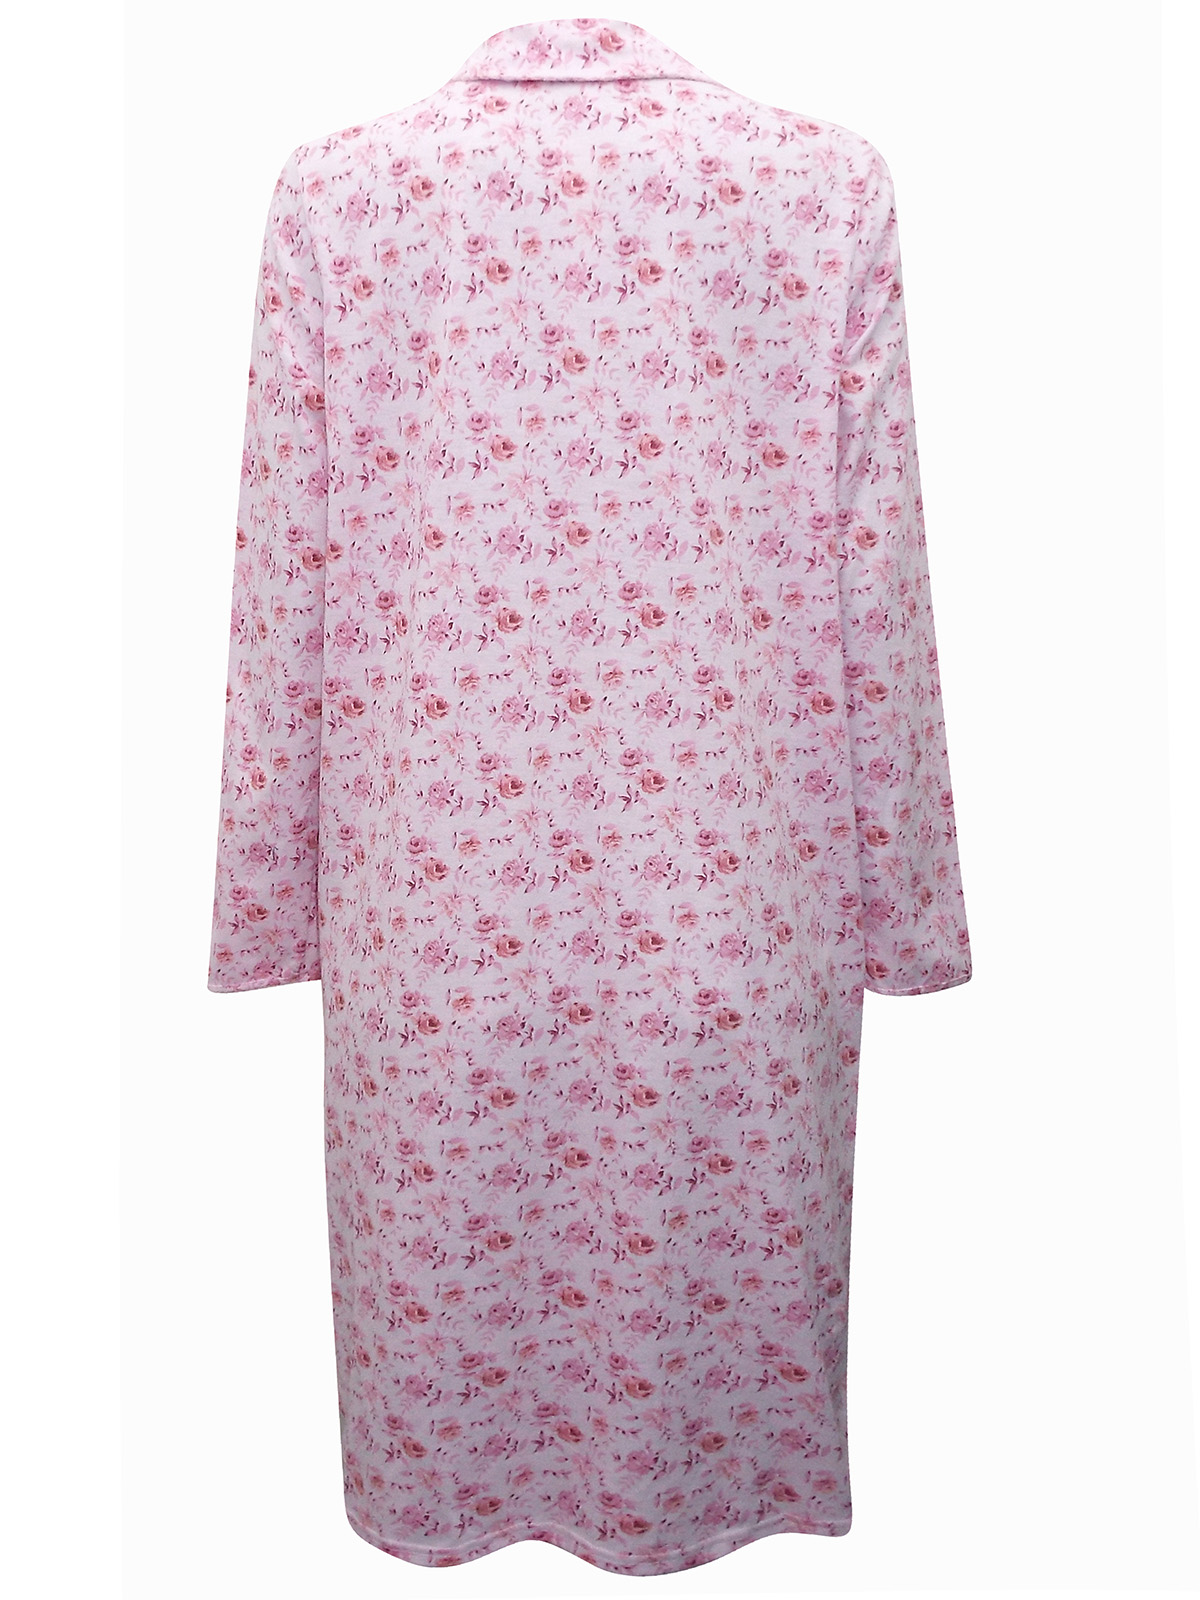 PINK Floral Print Long Sleeve Nightdress - Size 8/10